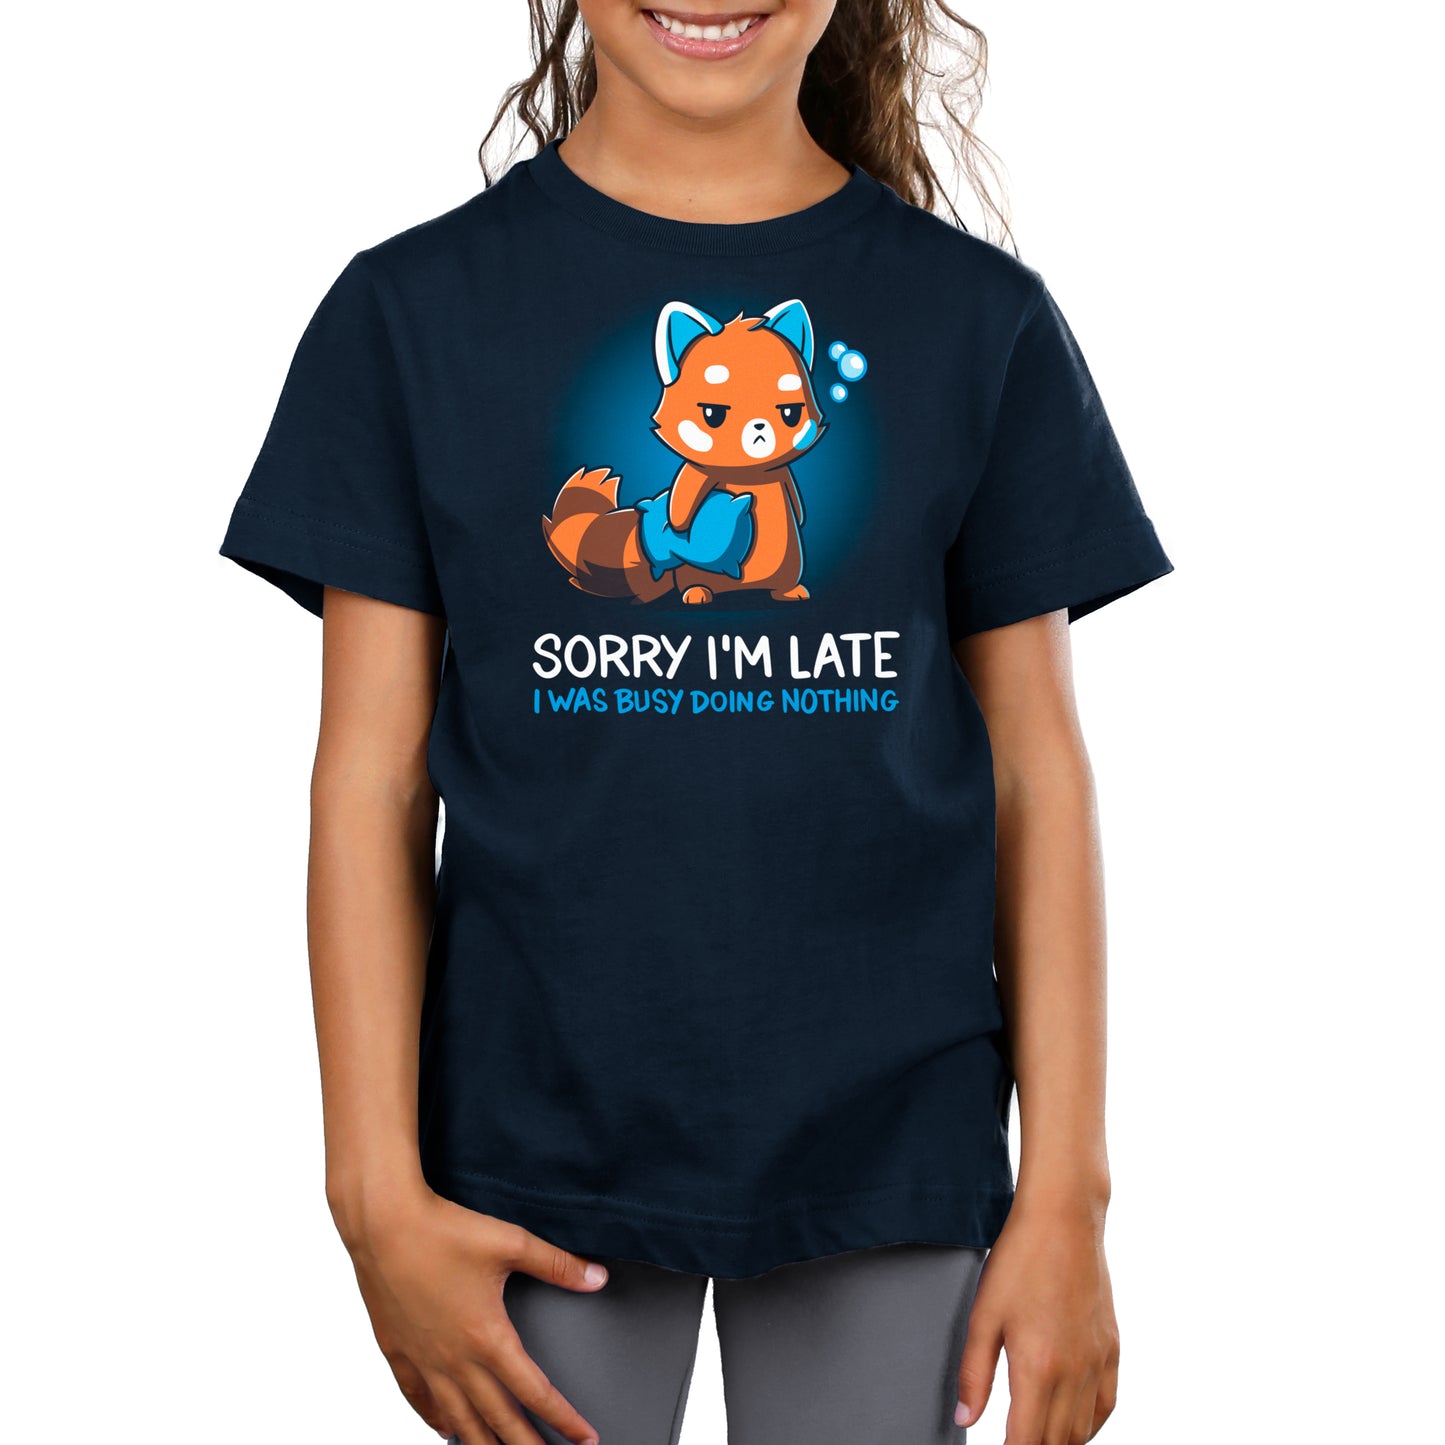 A girl wearing a comfortable "Sorry I'm Late" t-shirt by TeeTurtle.